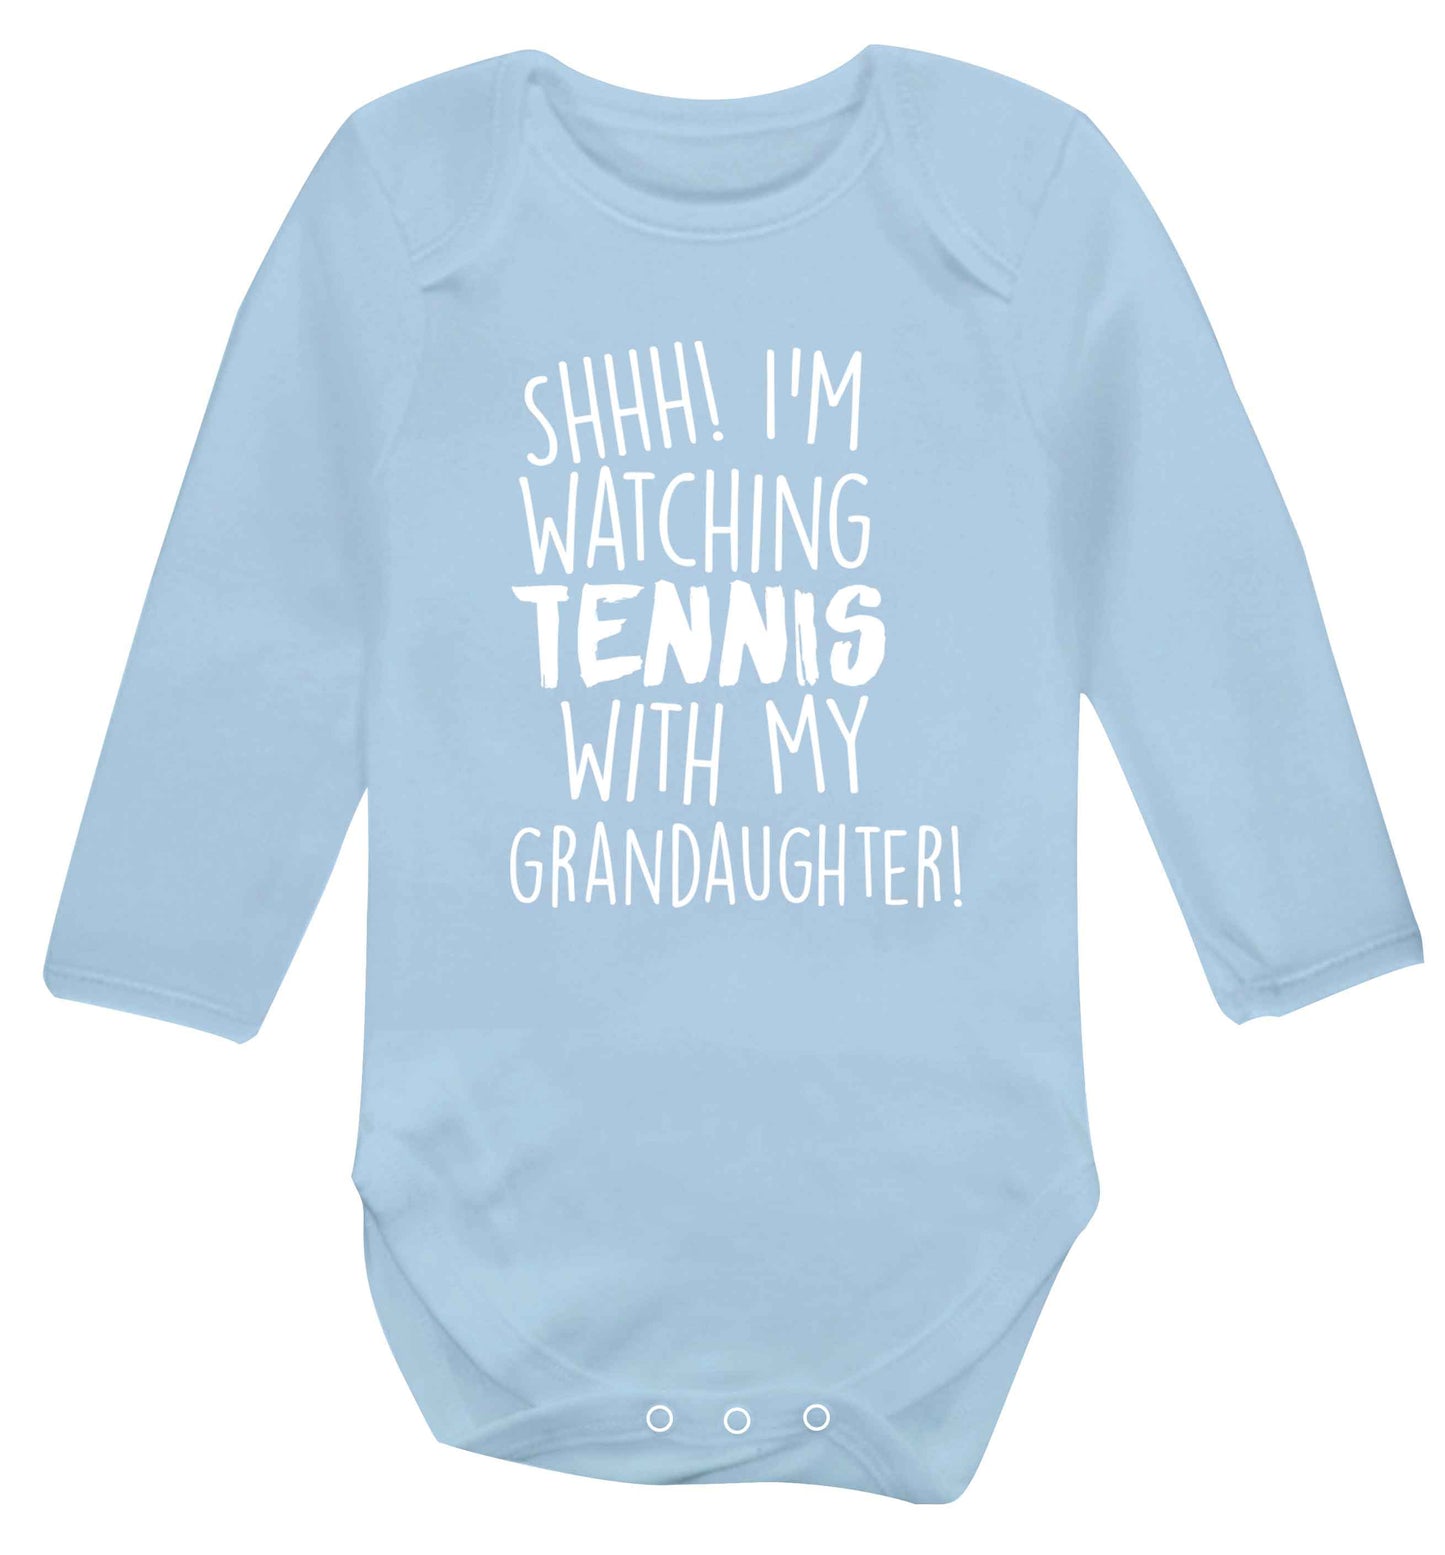 Shh! I'm watching tennis with my granddaughter! Baby Vest long sleeved pale blue 6-12 months